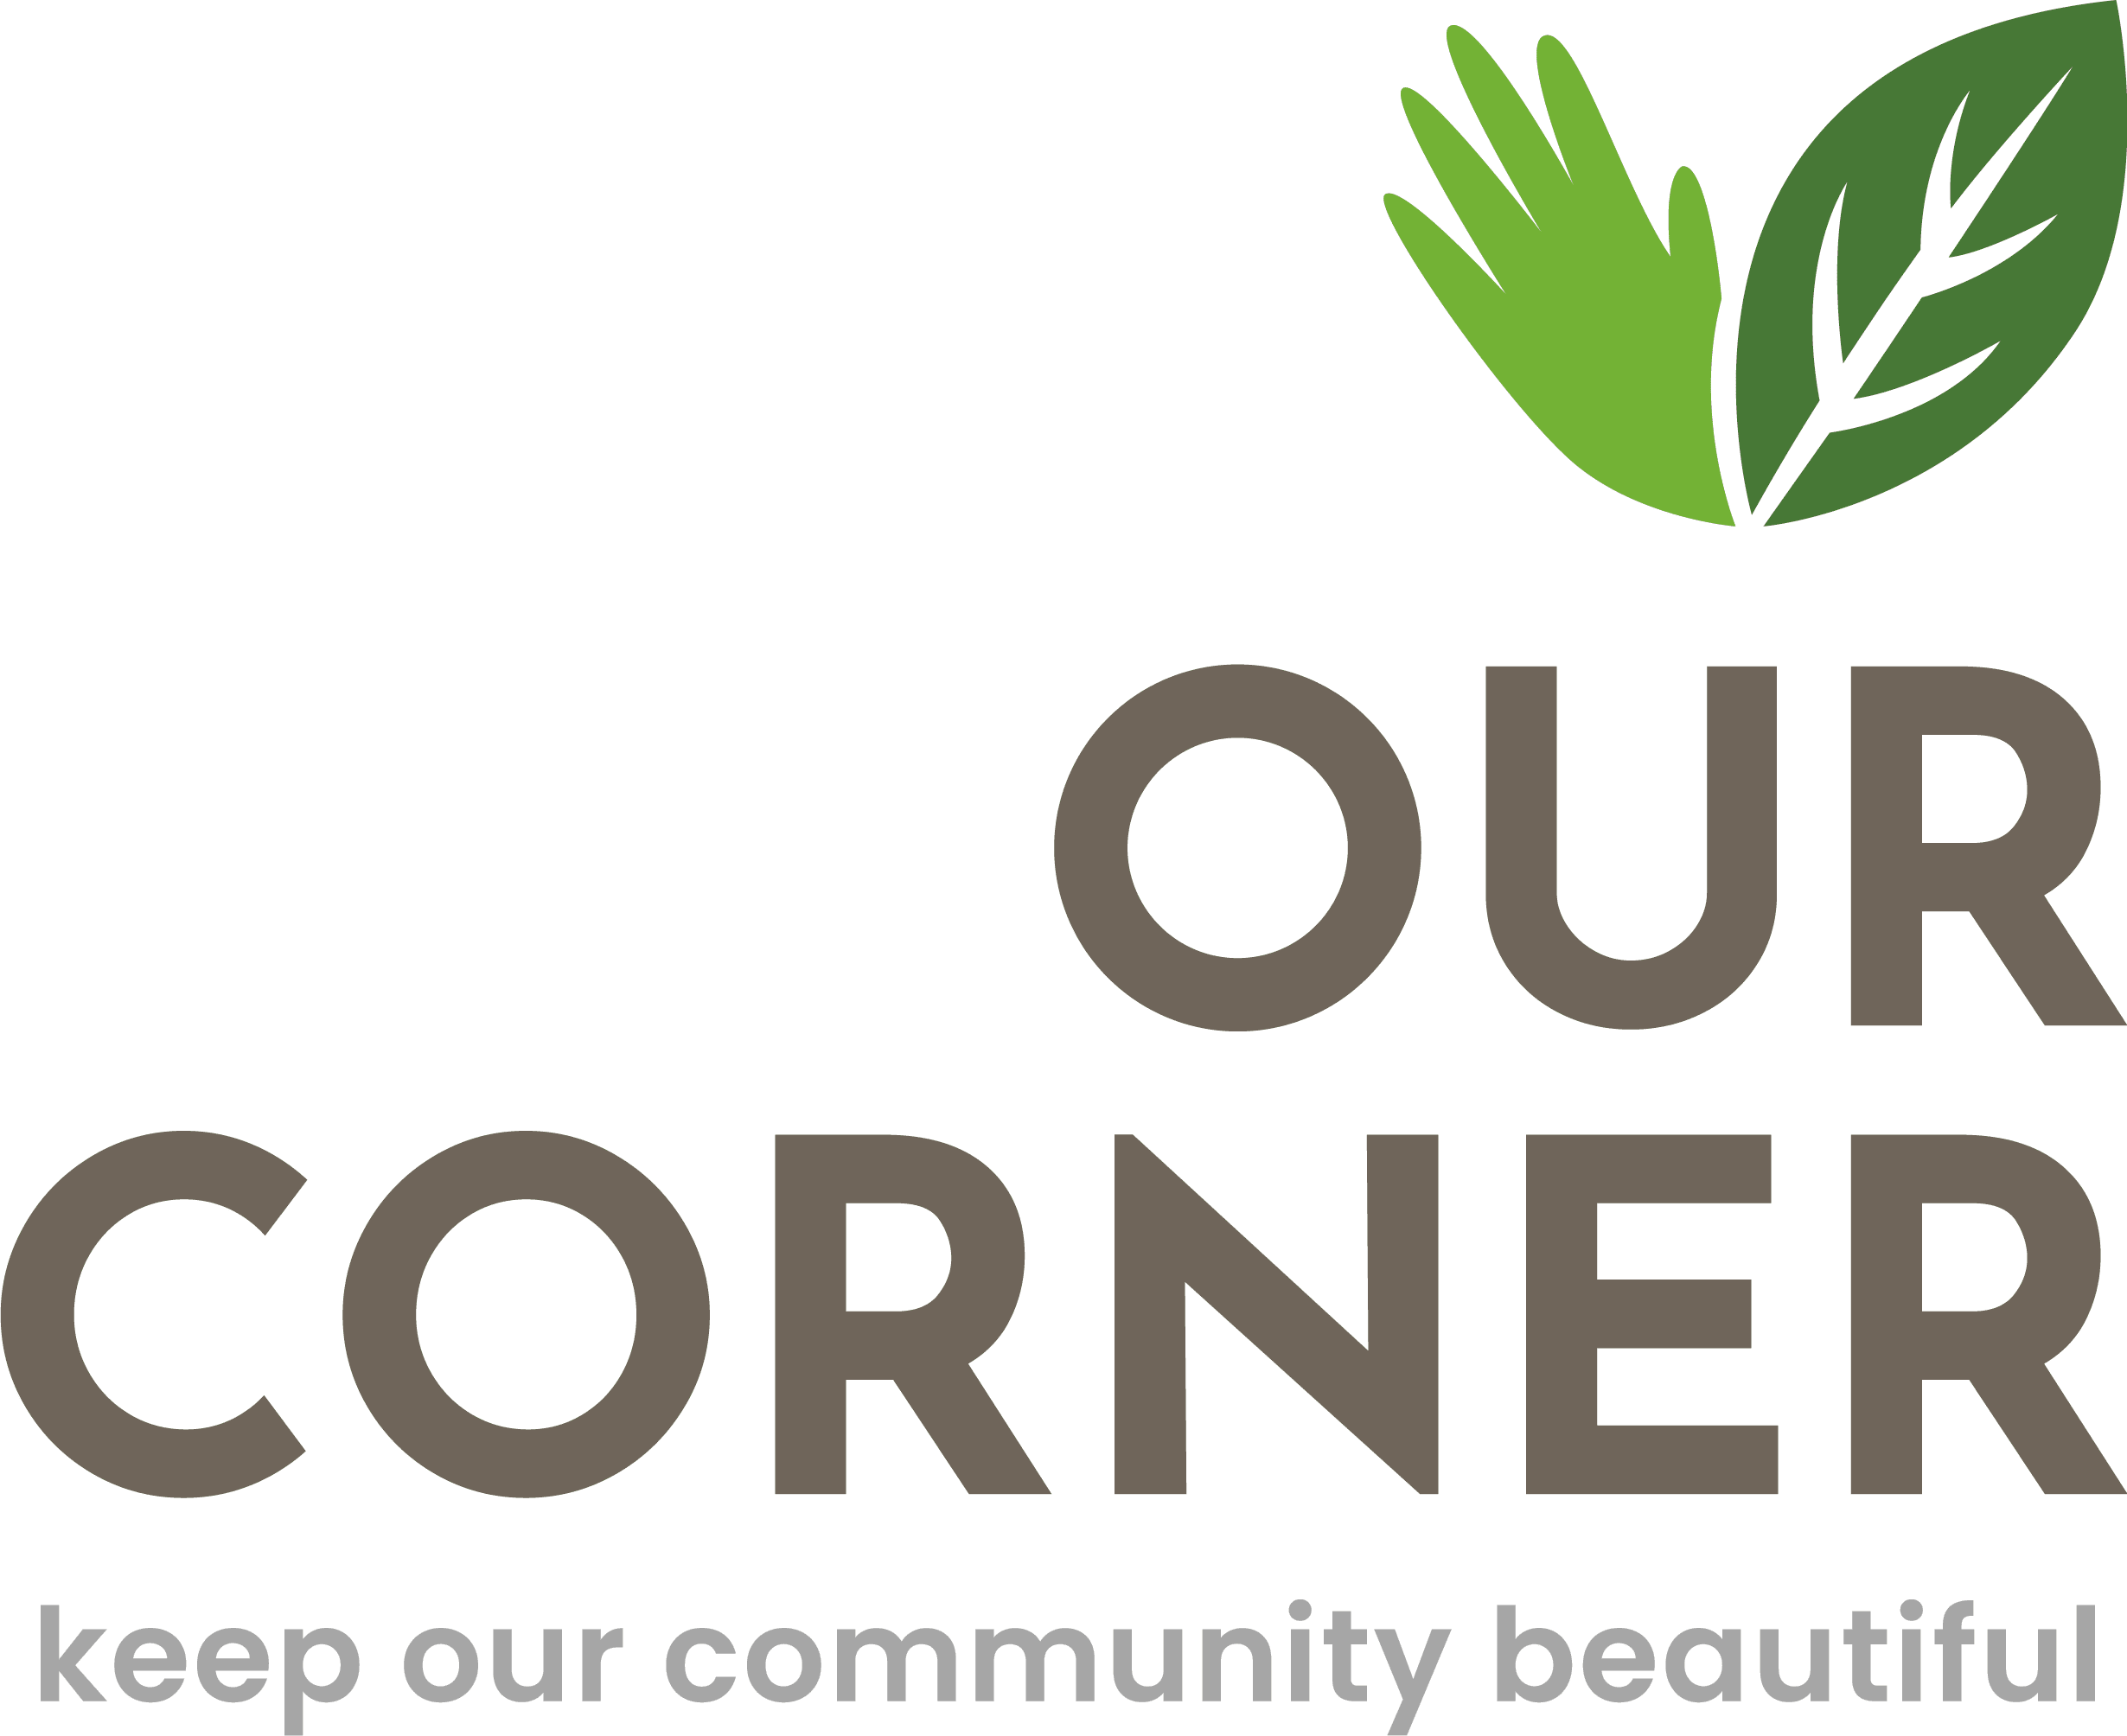 our corner escambia keep our community beautiful logo